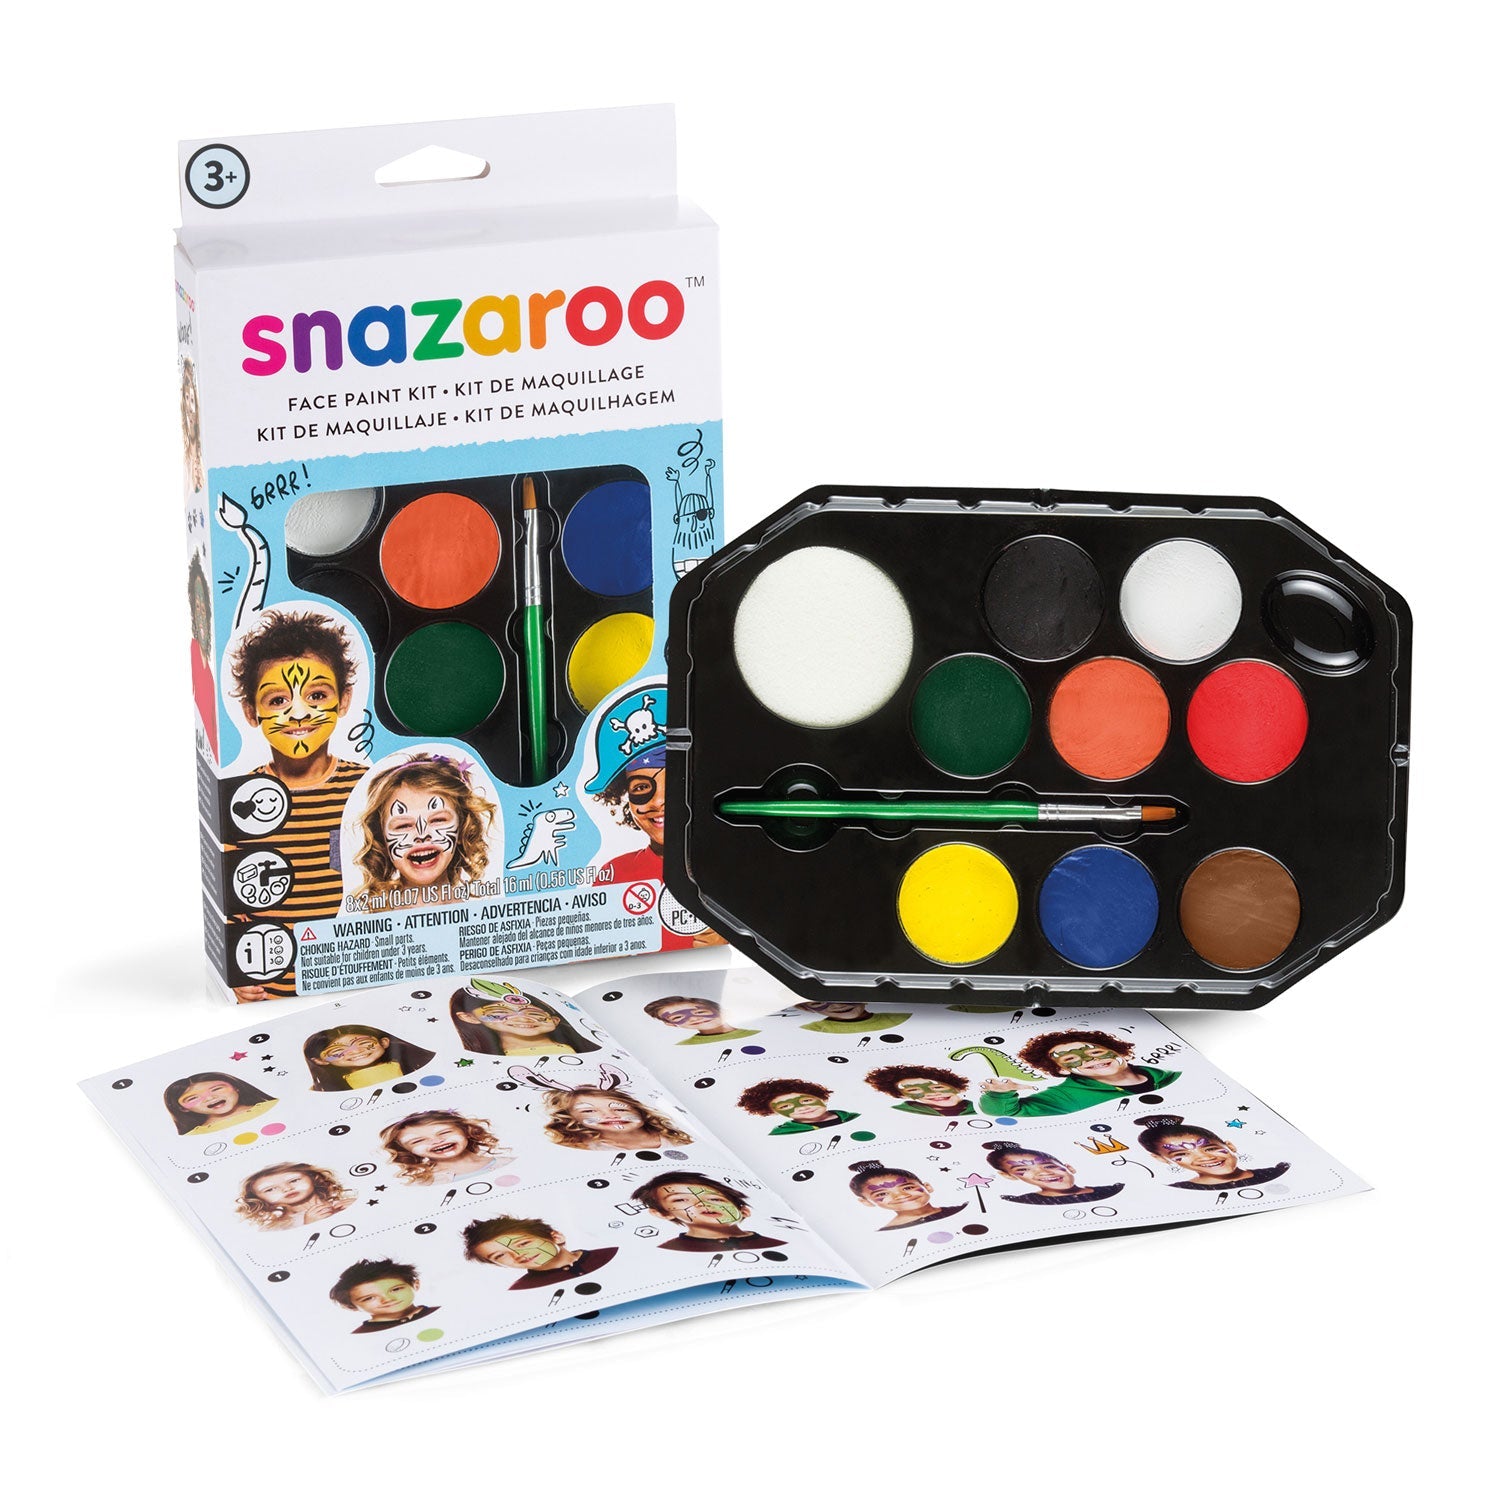 Snazaroo Boy Face Painting Kit includes 2ml White, Black, Orange, Bright Yellow, Dark Green, Royal Blue, Light Brown and Bright Red, Brush, Sponge and Step-by-step face painting guide. Paints up to 50 faces.